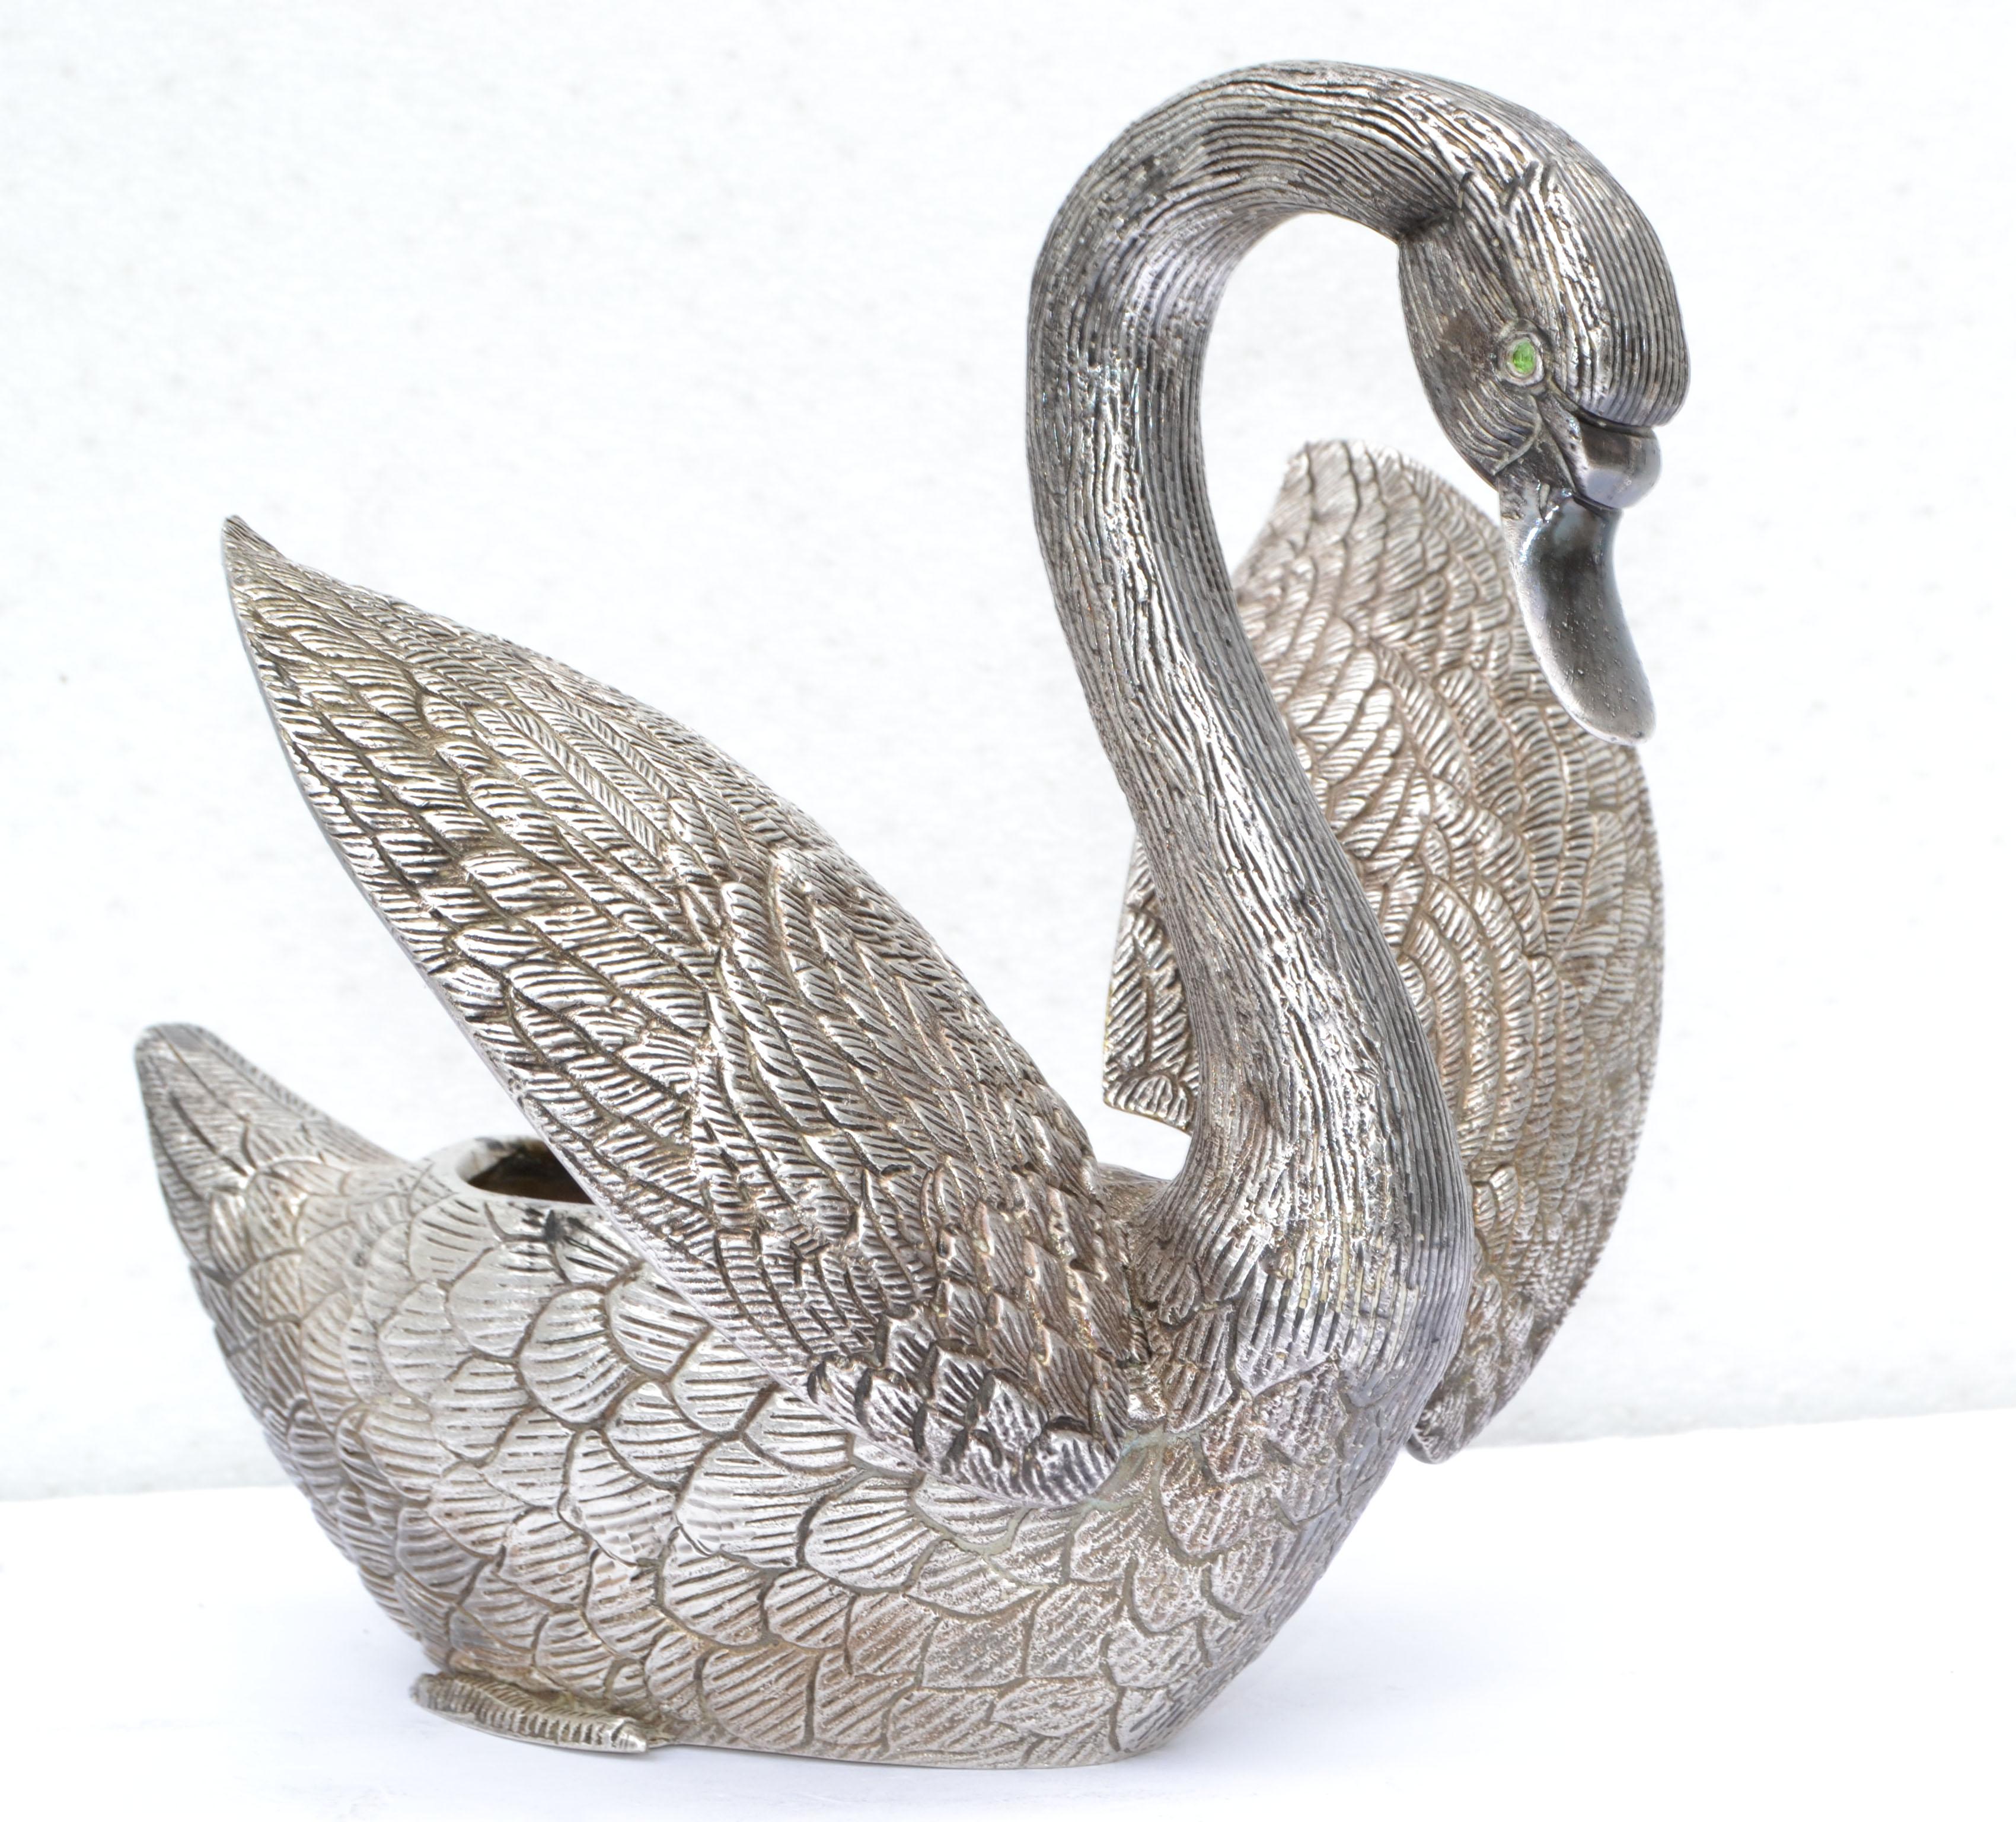 Original graceful Swan with open wings Mauro Manetti silver plate owl ice bucket with metal insulation, made in Italy.
This is a very early piece and the attention to the details is breathtaking.
Highly favored Collectors Animal Sculptures, Animal